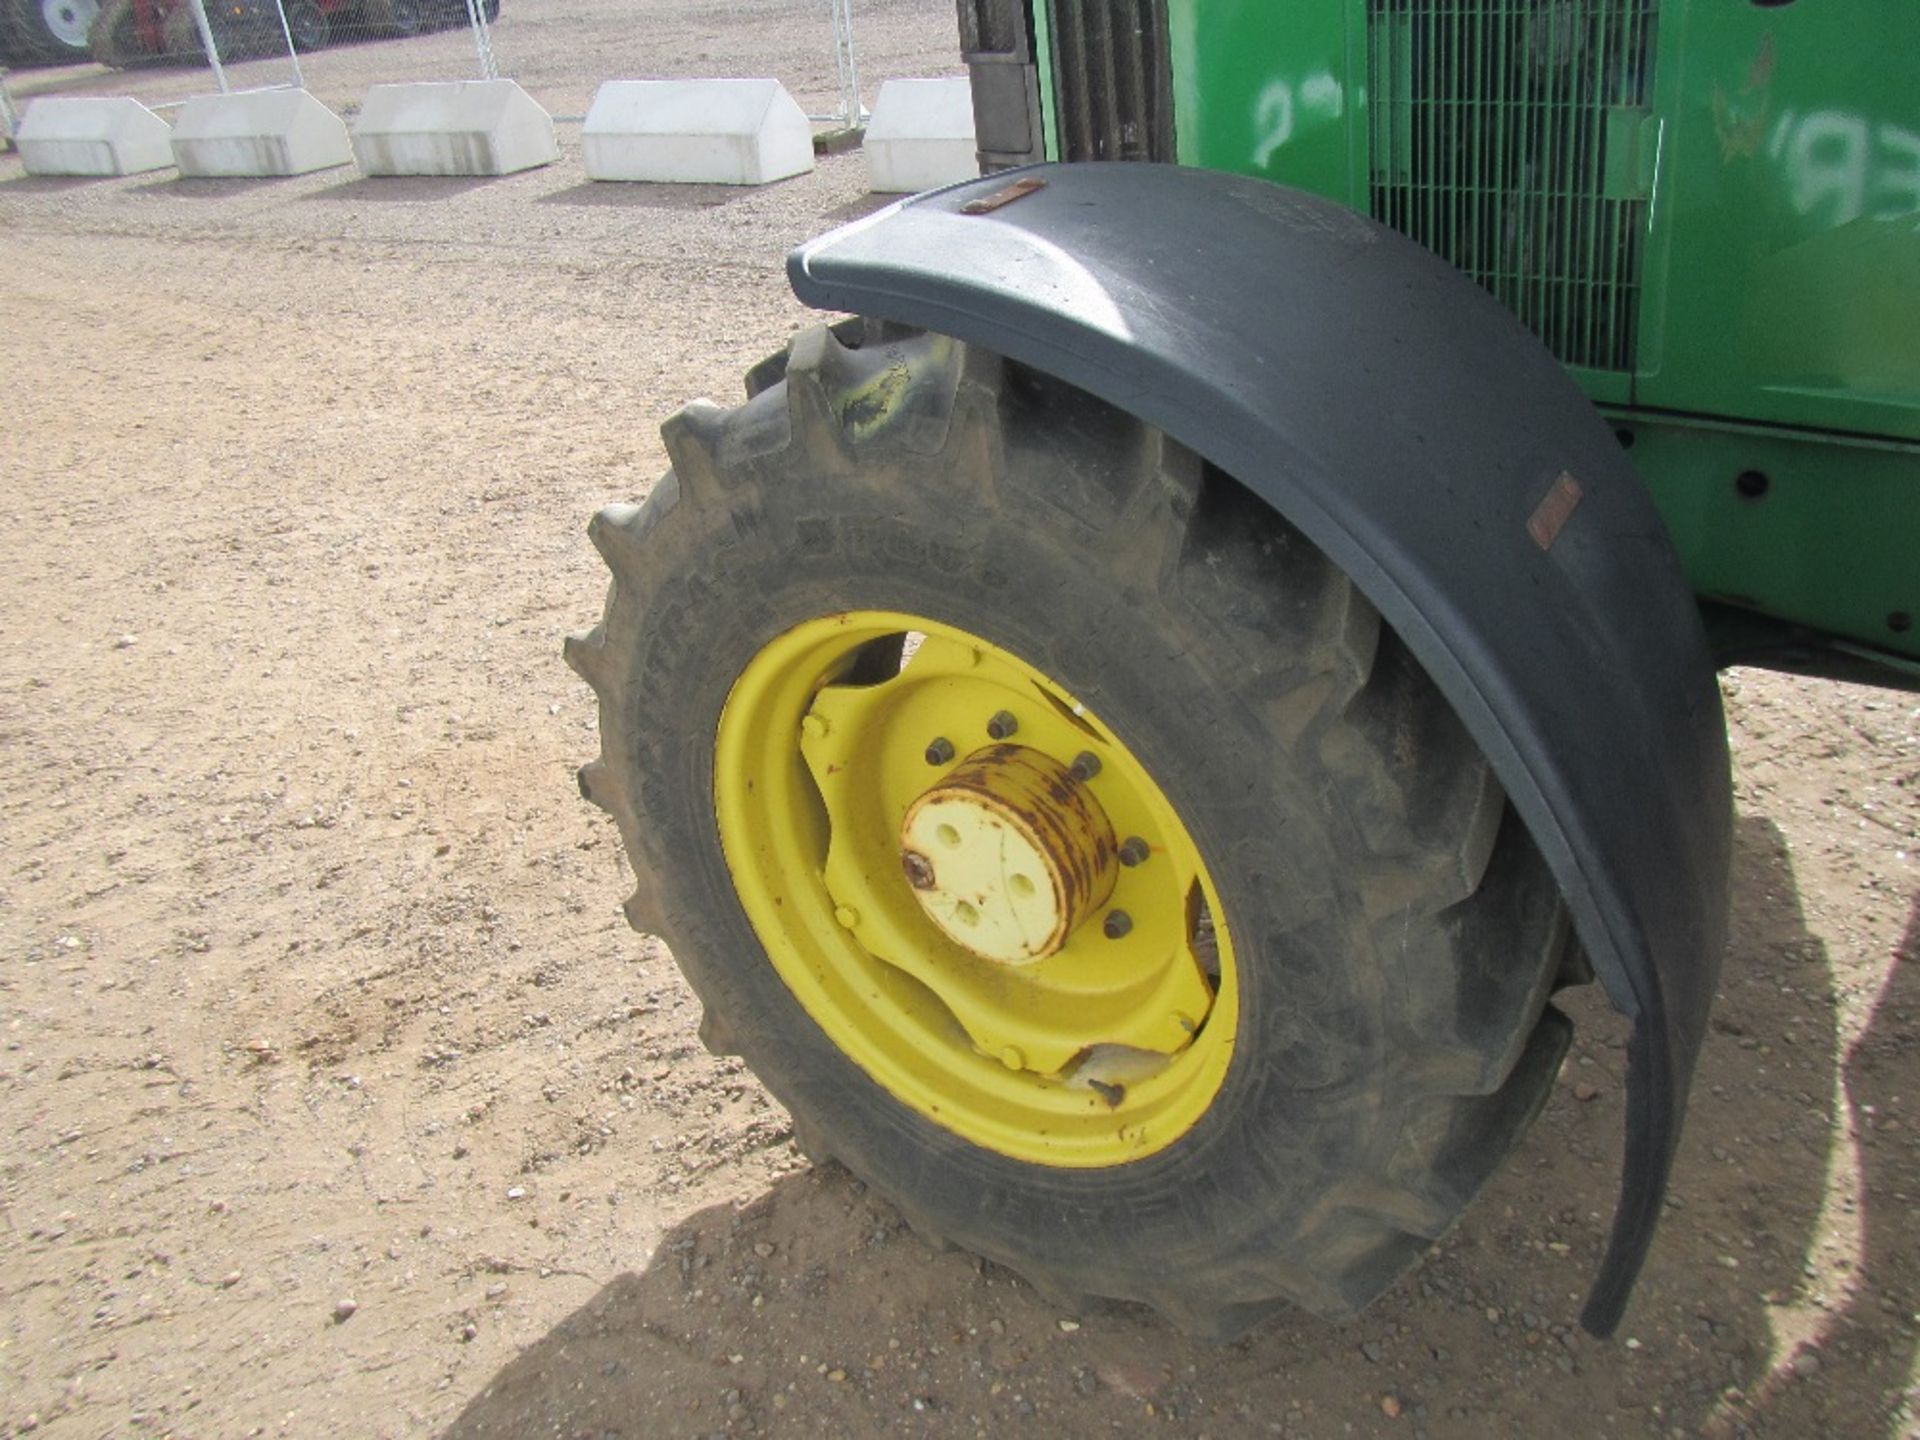 2000 John Deere 6010 4wd Tractor with Air Con & Creeper Gear. From Veg Rig. 4542 hrs. Reg No X153 - Image 11 of 17